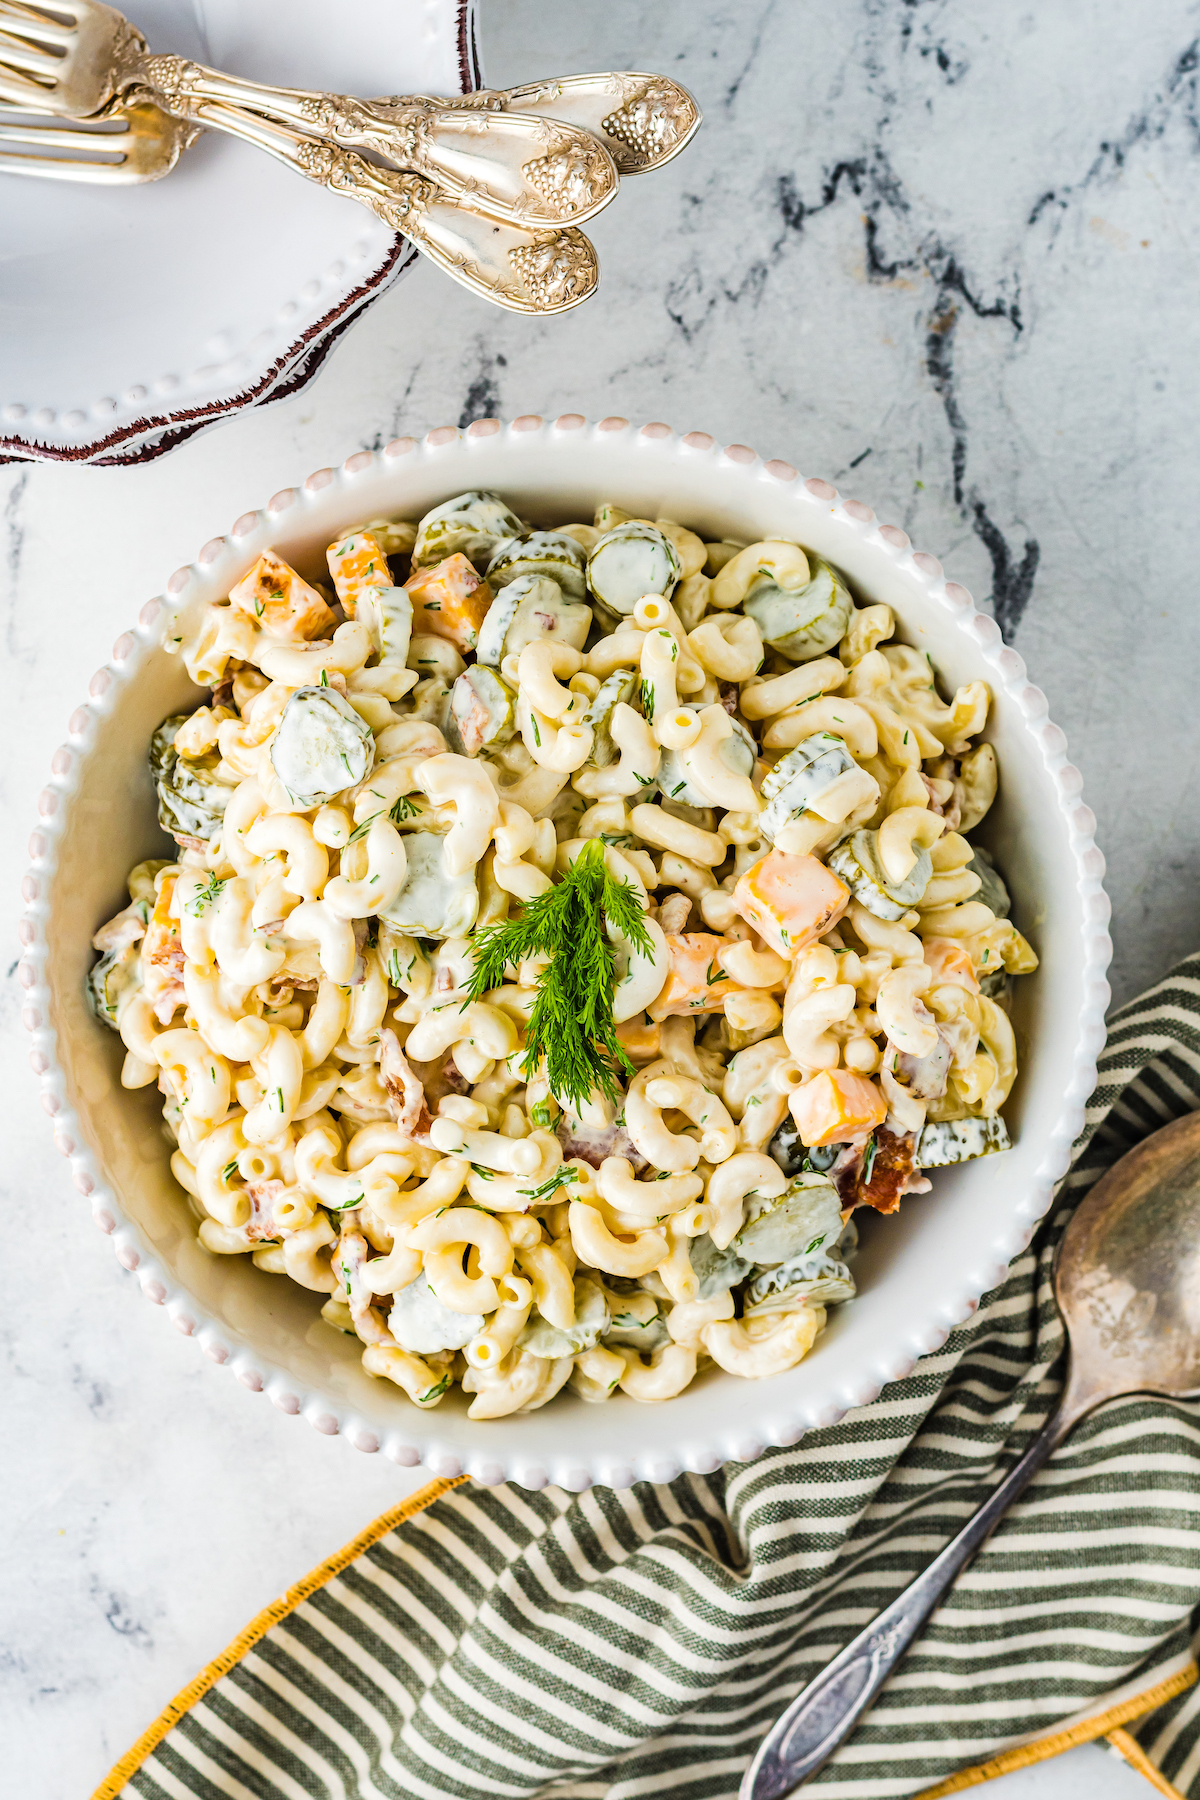 Pasta salad garnished with fresh dill.